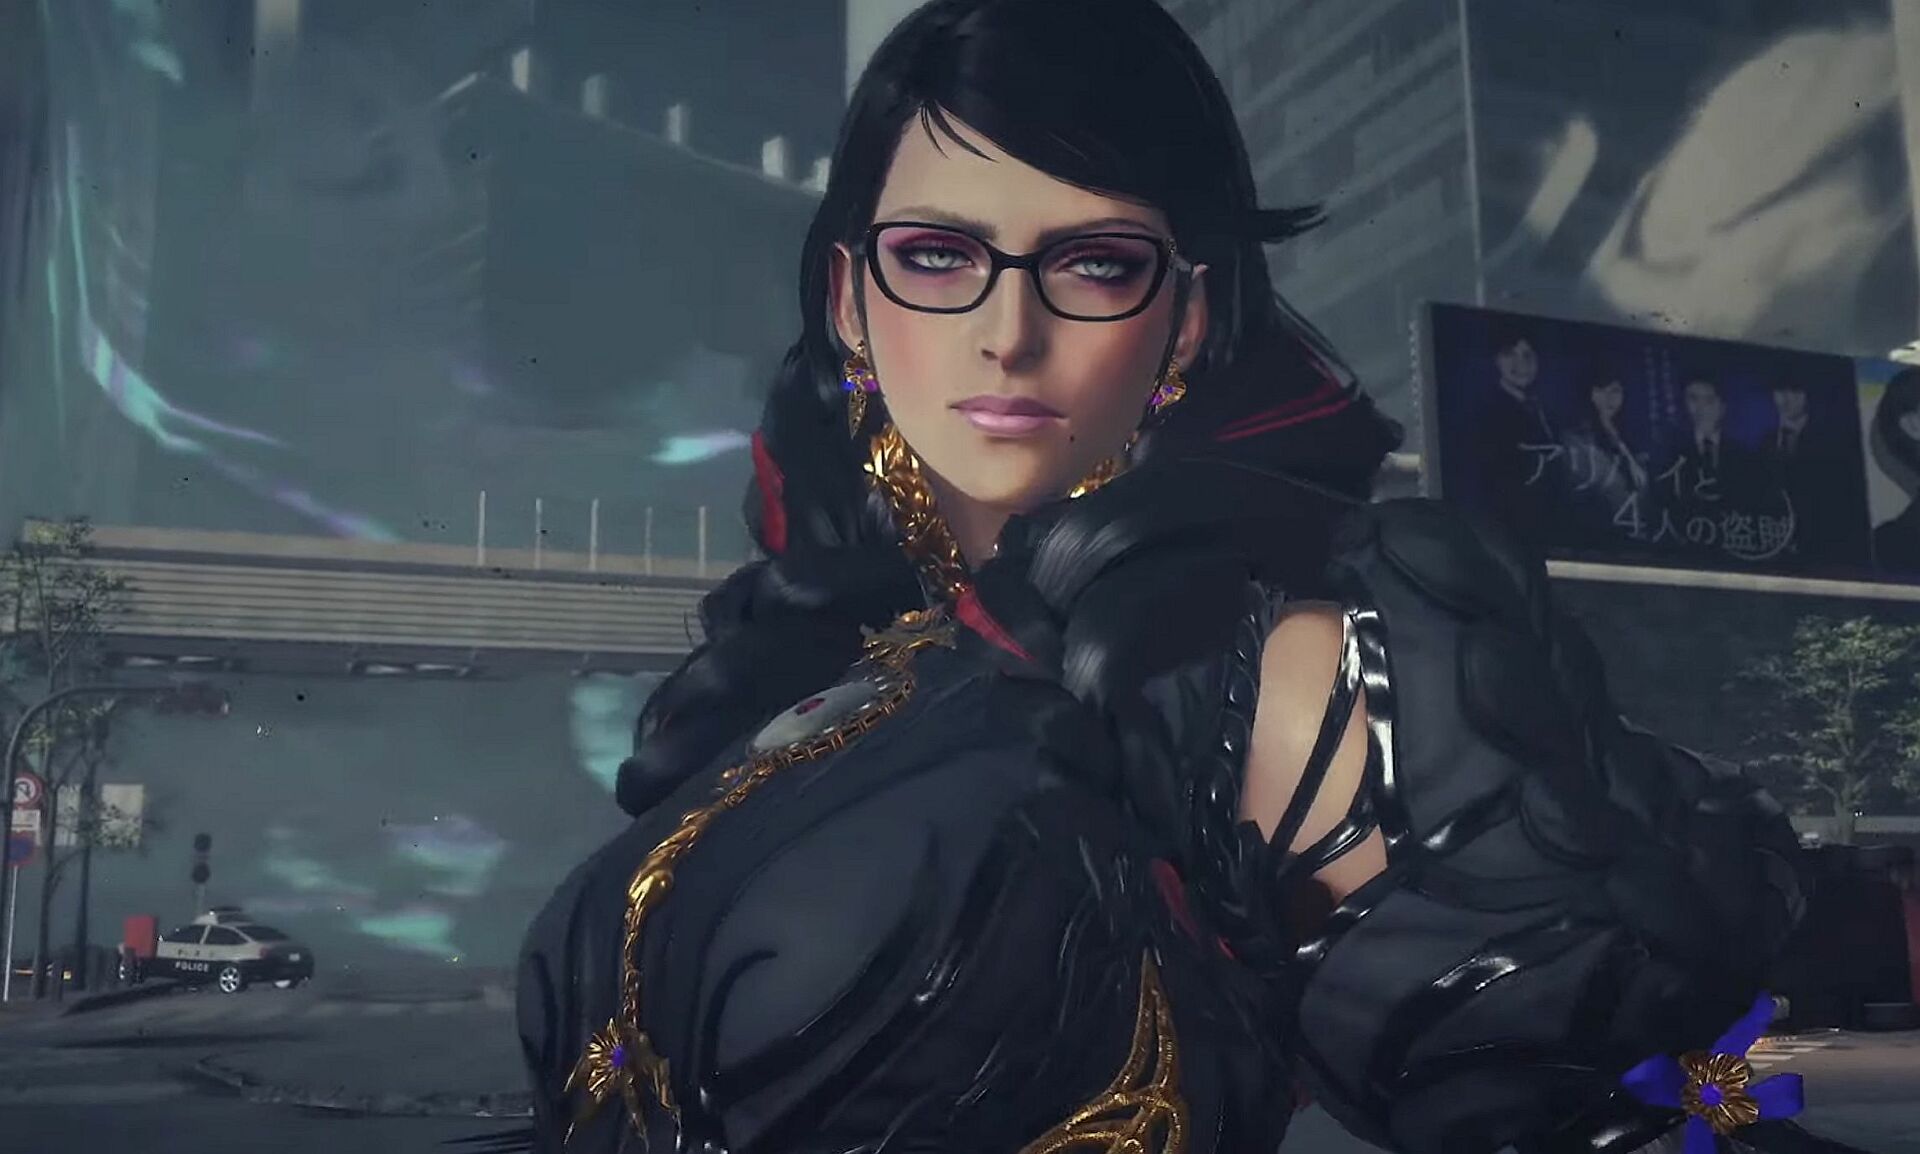 Bayonetta voice actor seeks to “defend myself and my reputation” in update to claims of lacklustre pay